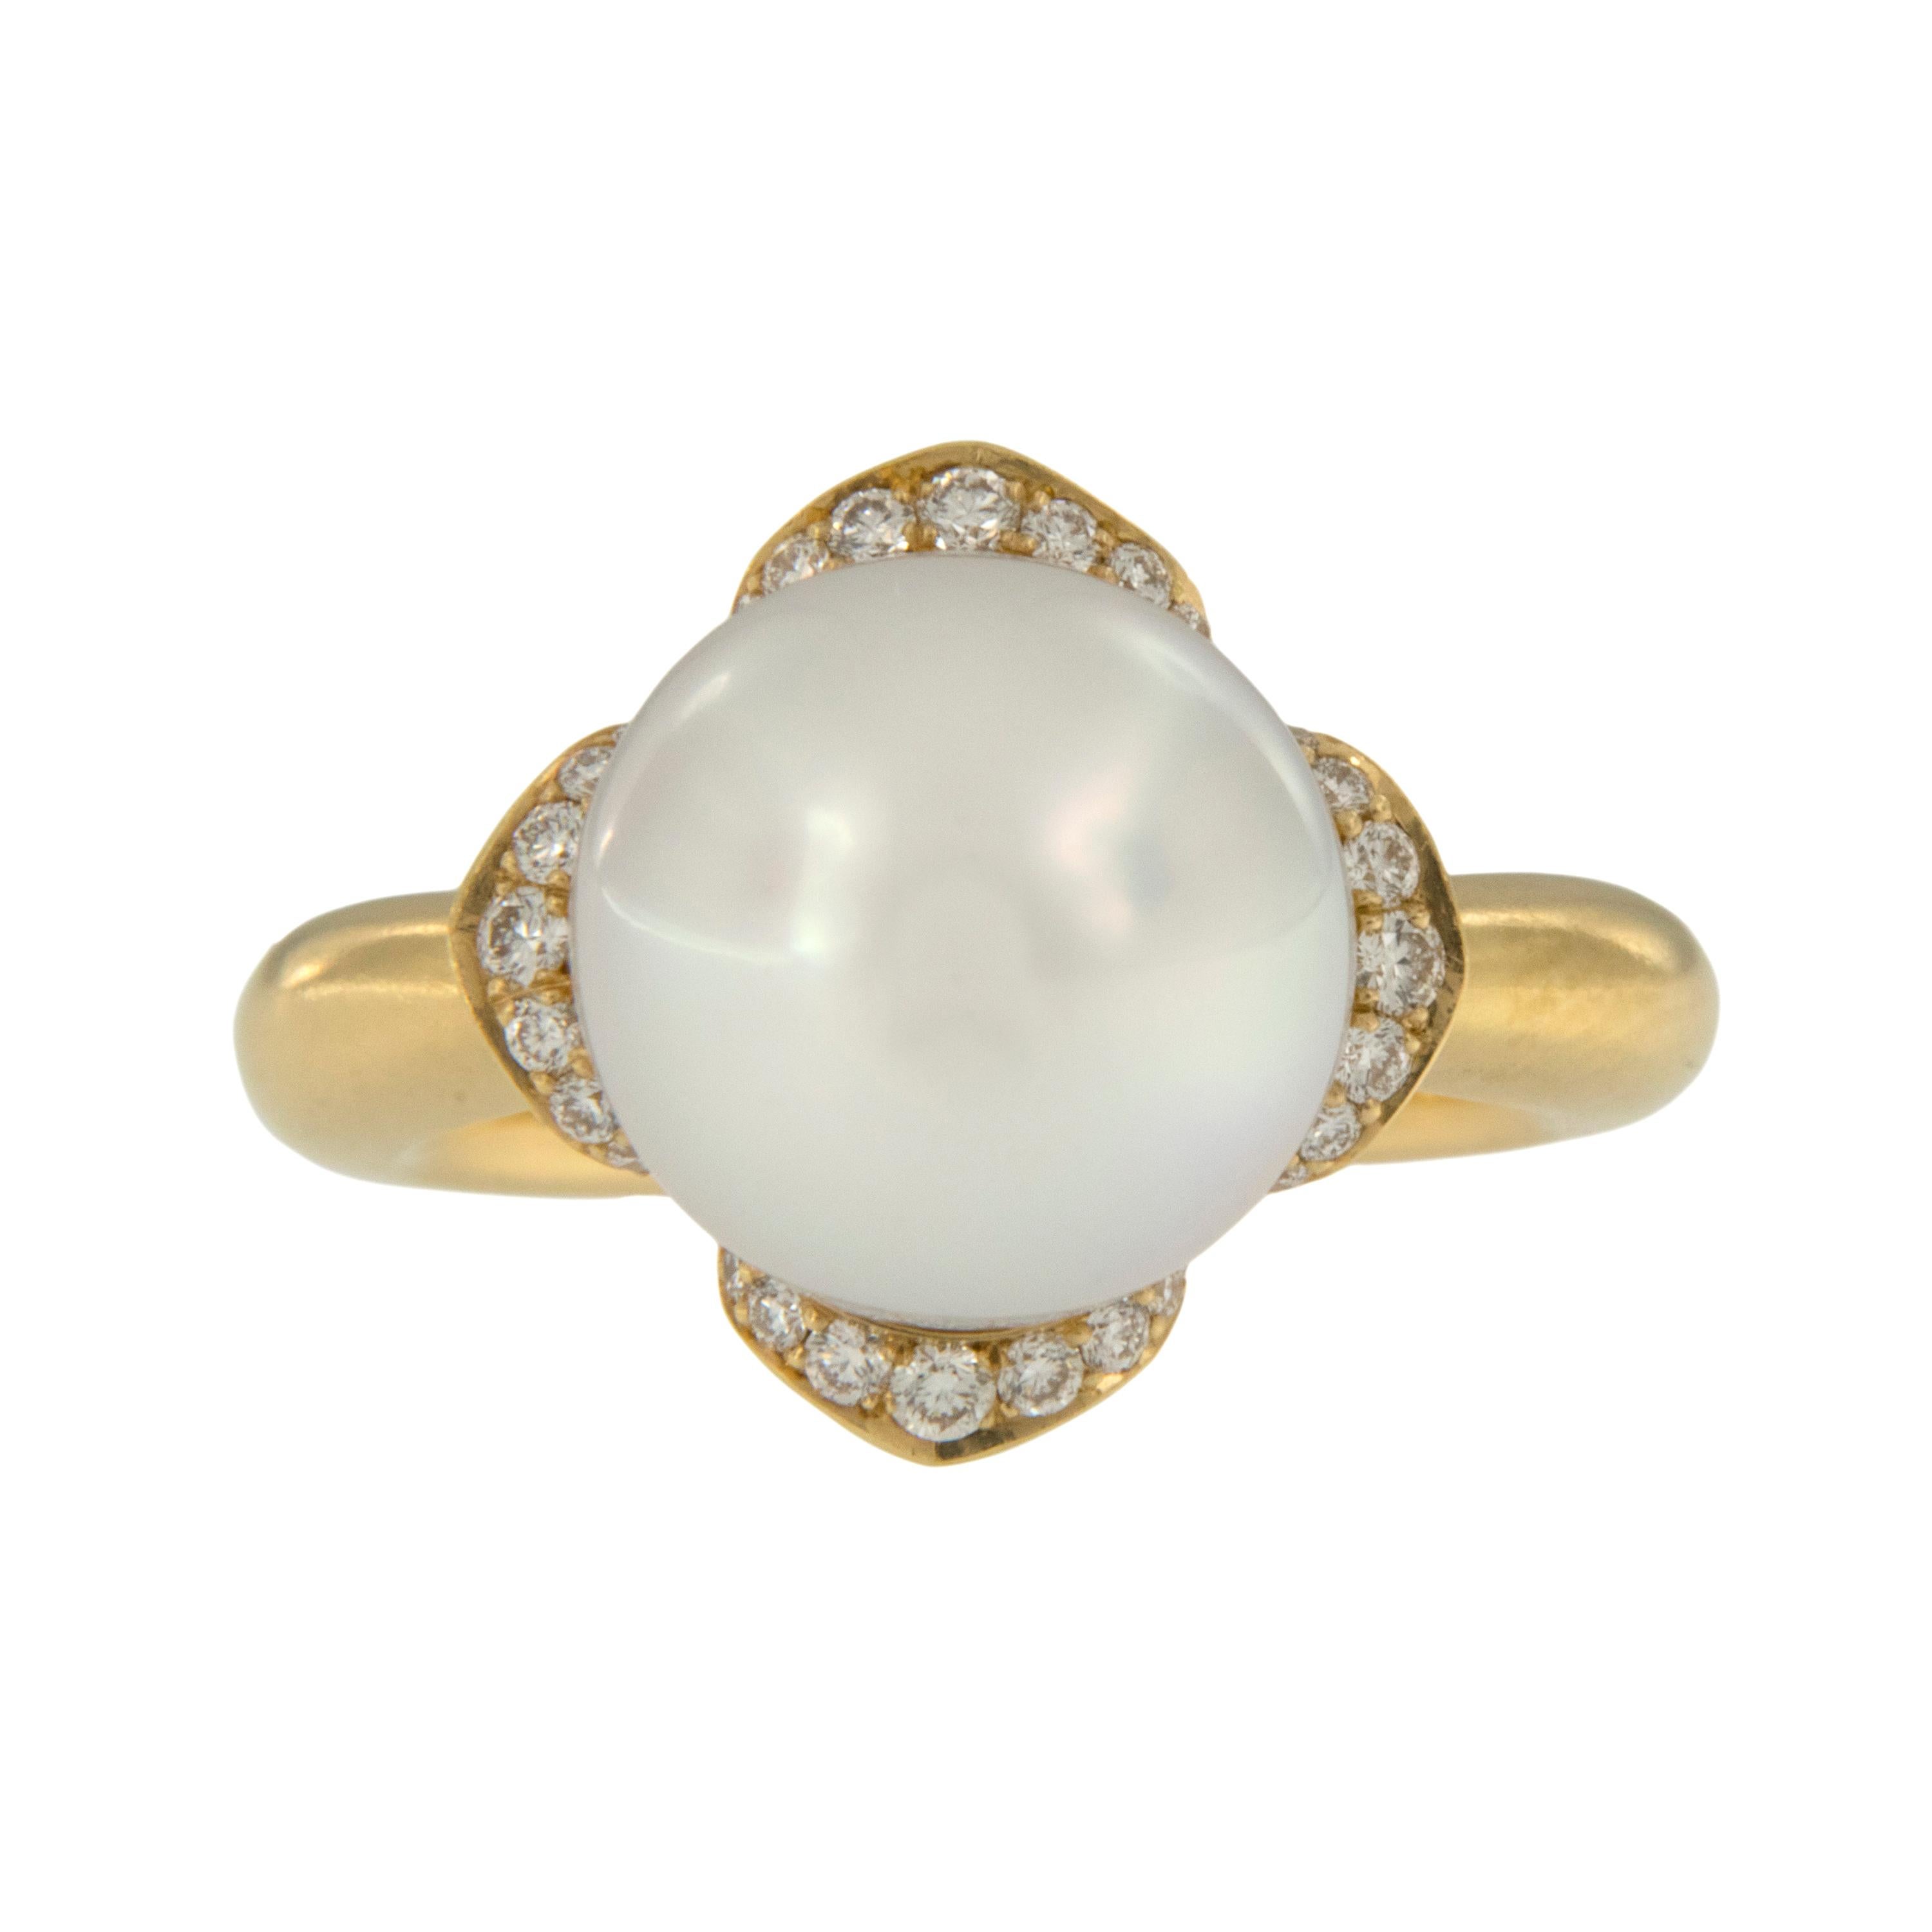 Assael is a name synonymous with the finest pearls of the world. This rare, 20 karat yellow gold flower inspired ring perfectly showcases a fine South Sea cultured pearl (12-11.7mm) which is further accented by 44 diamonds = 0.31 Cttw in a size 6,